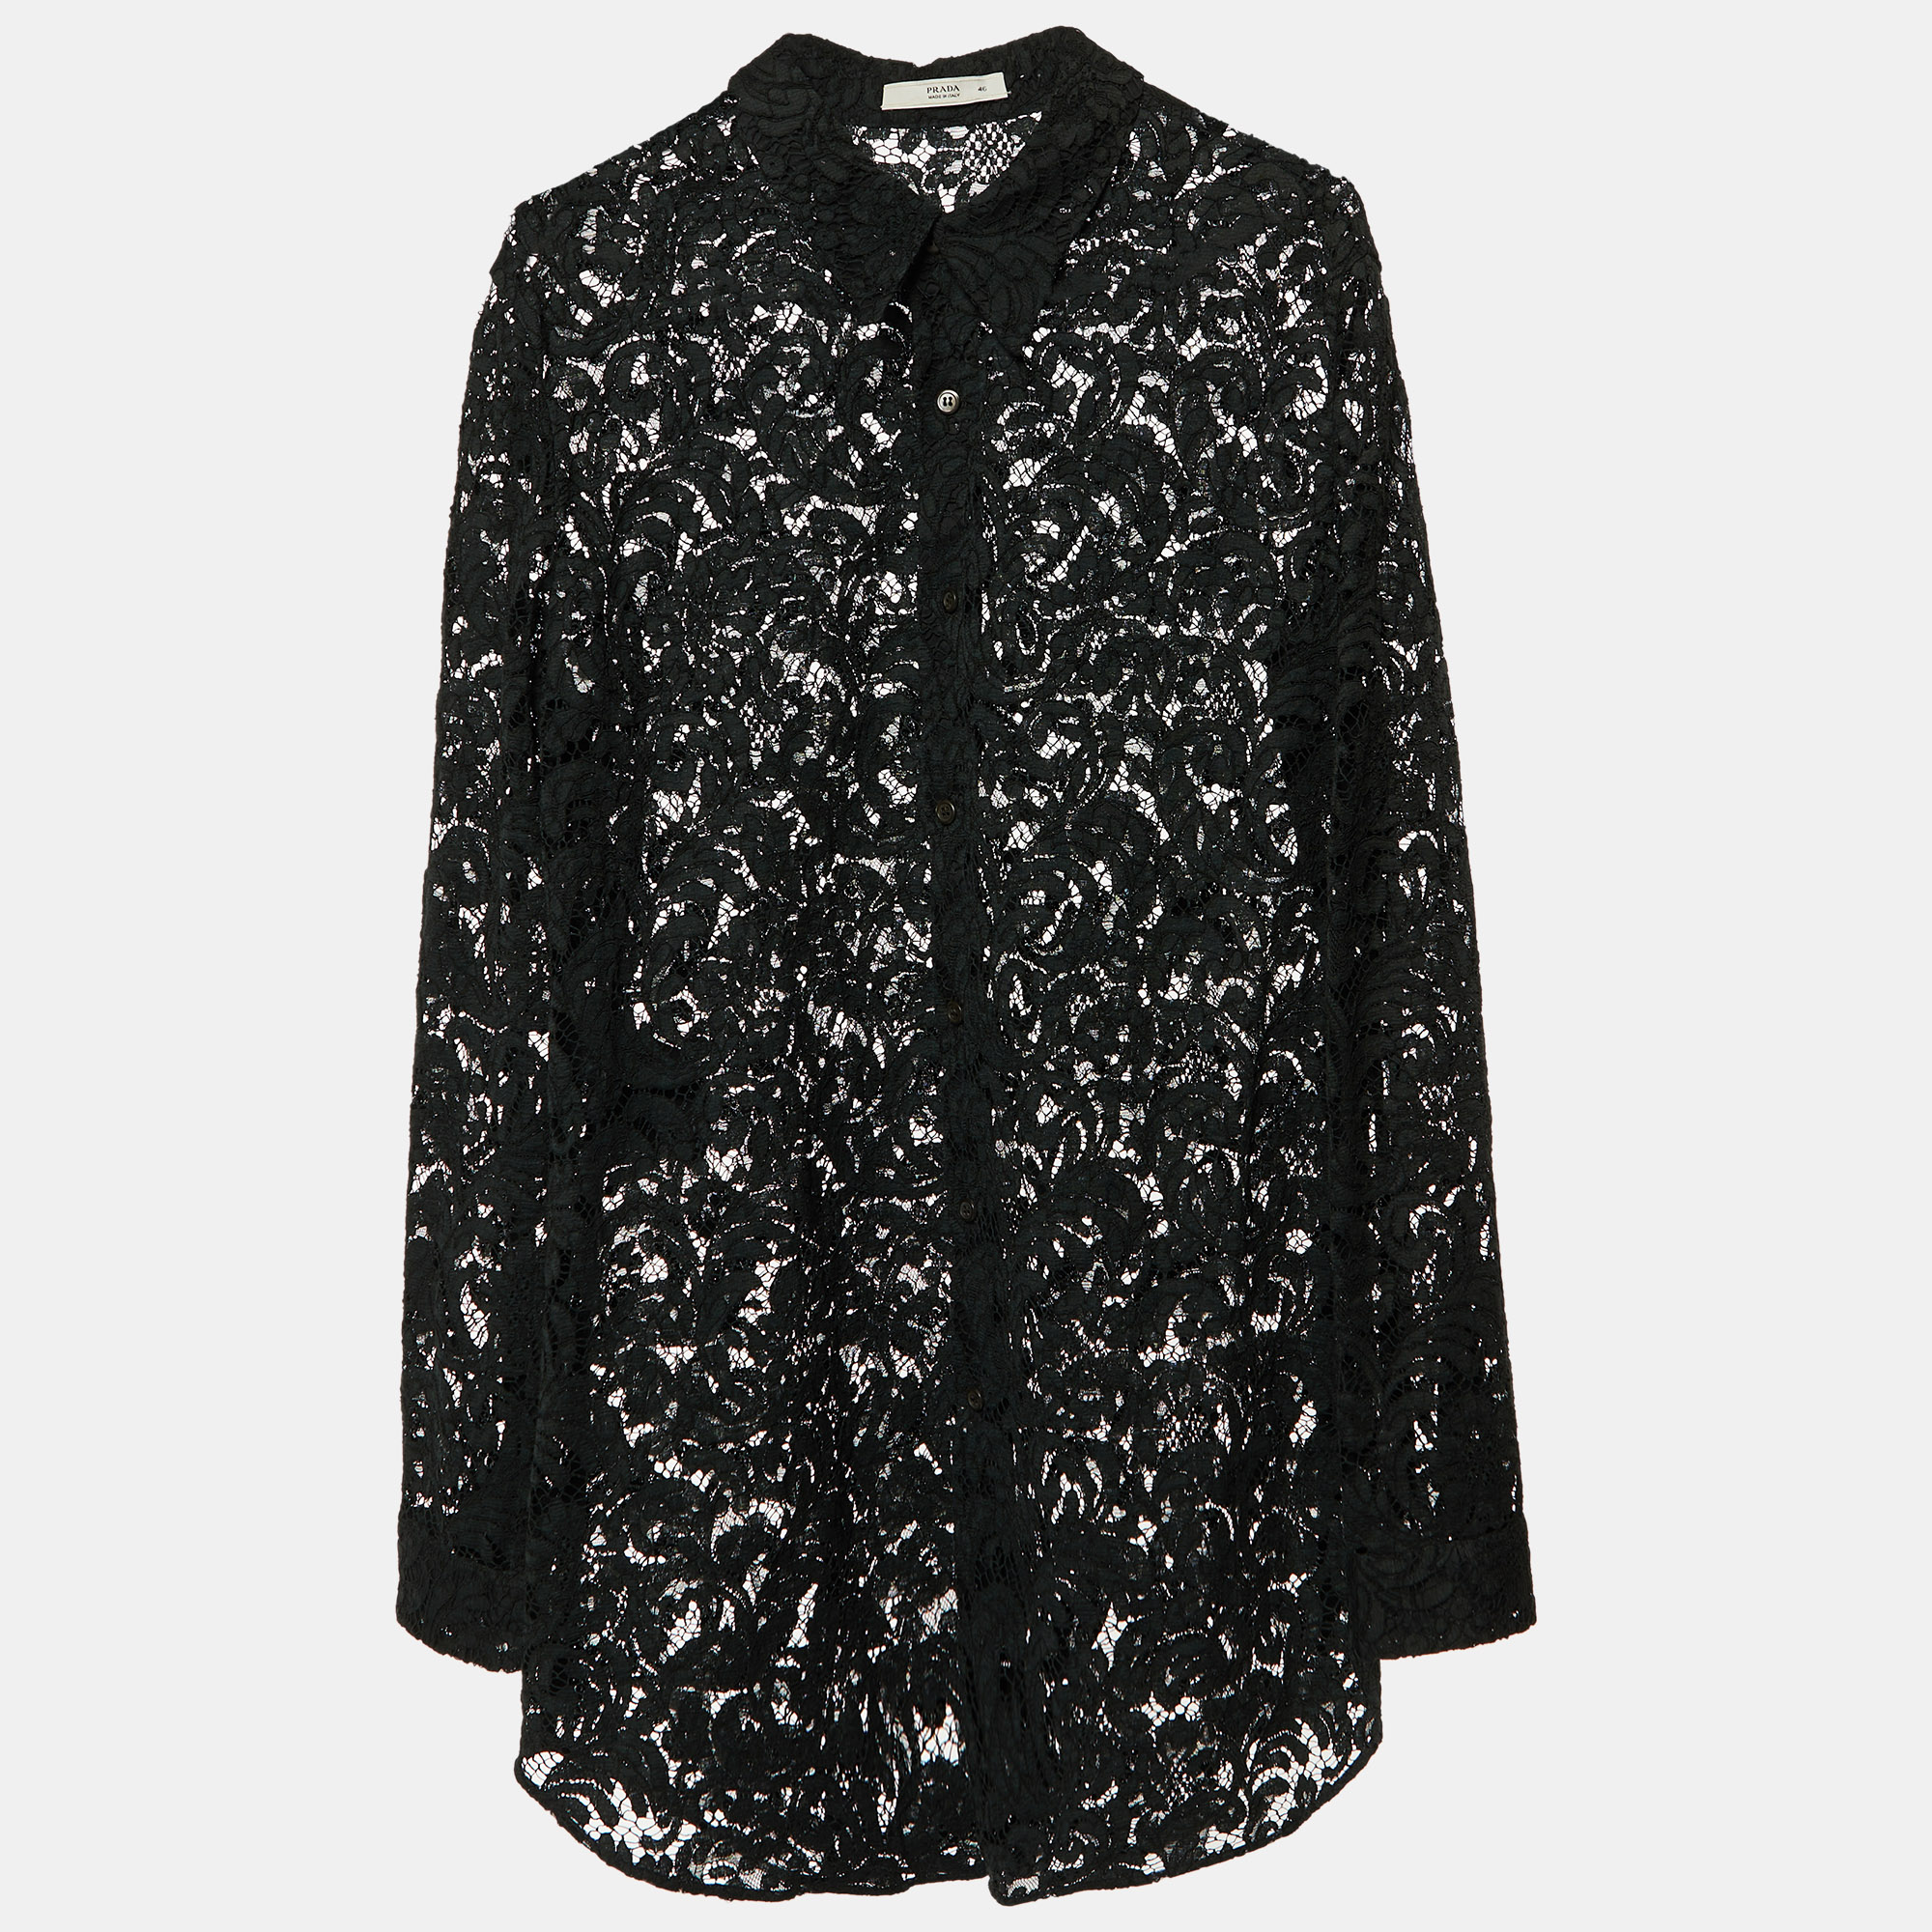 Prada Black Floral Lace Button Front Full Sleeve Shirt L